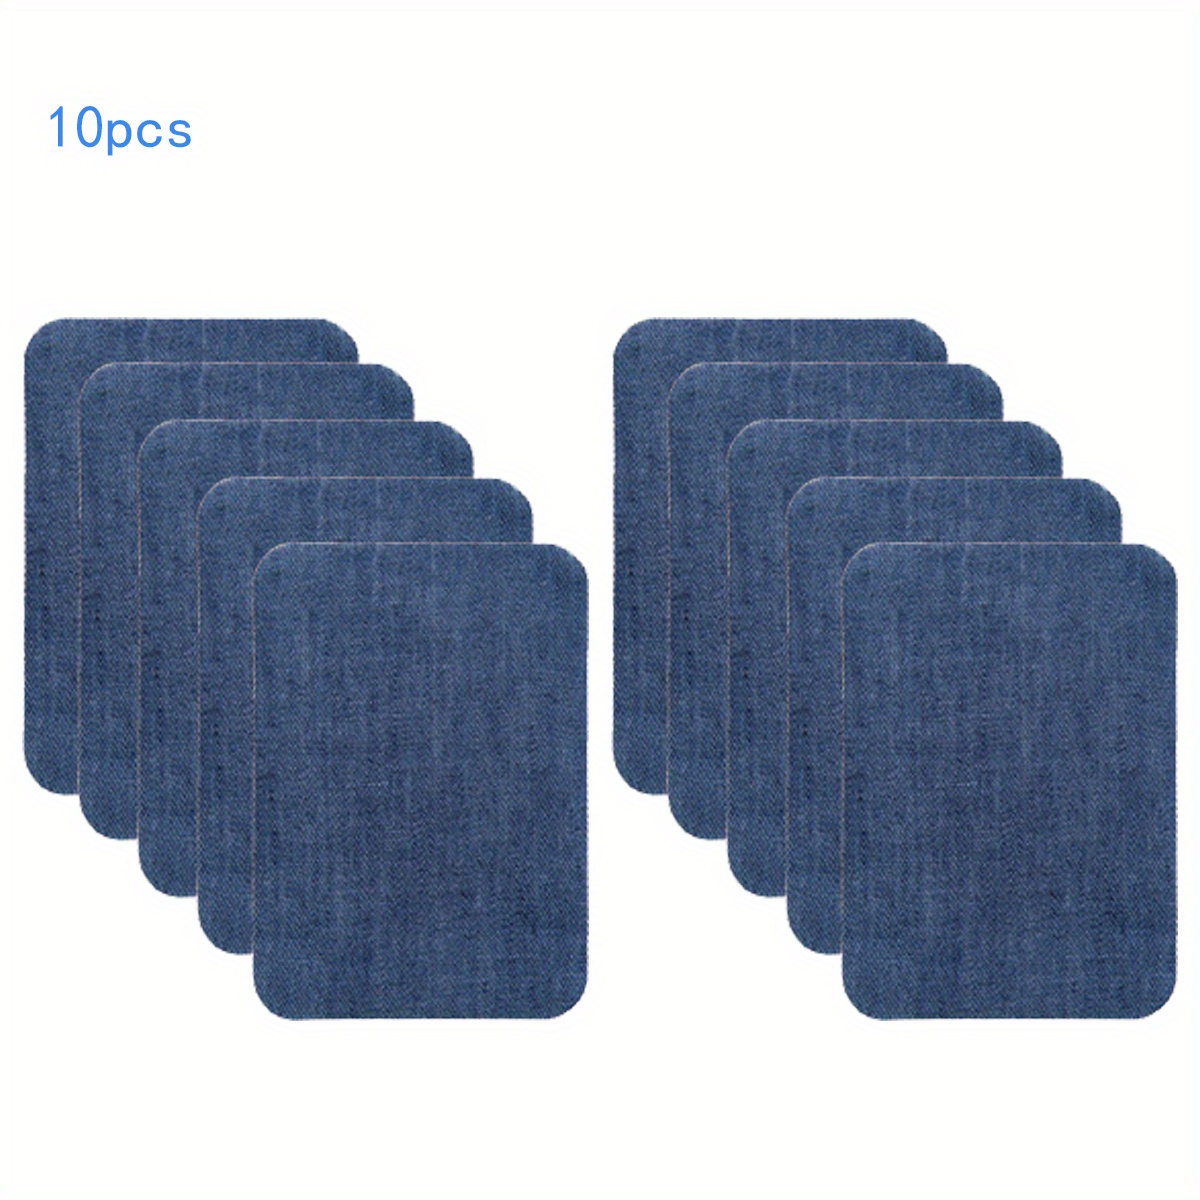 Jeans Denim Patches, 10X6Inch Denim Patches for Jeans, Strongest Glue Denim  Iron-on Jean Patches for Inside Jeans and Clothing Repair, 5 Colors（Dark